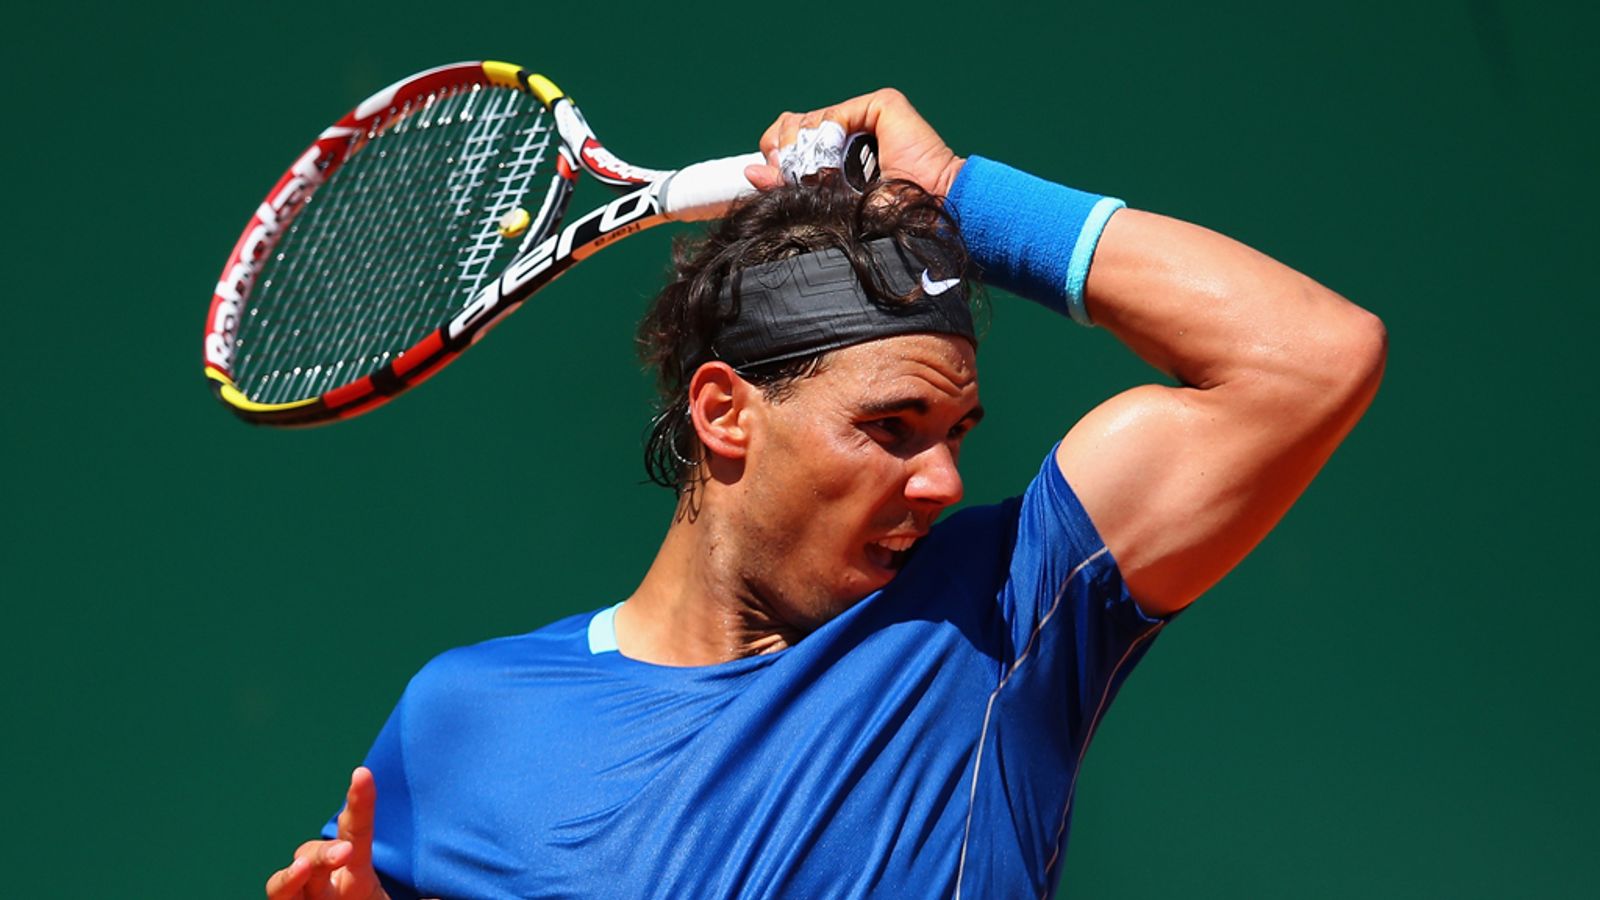 ATP Monte Carlo Masters Rafael Nadal beats Andreas Seppi for 300th win on clay Tennis News Sky Sports